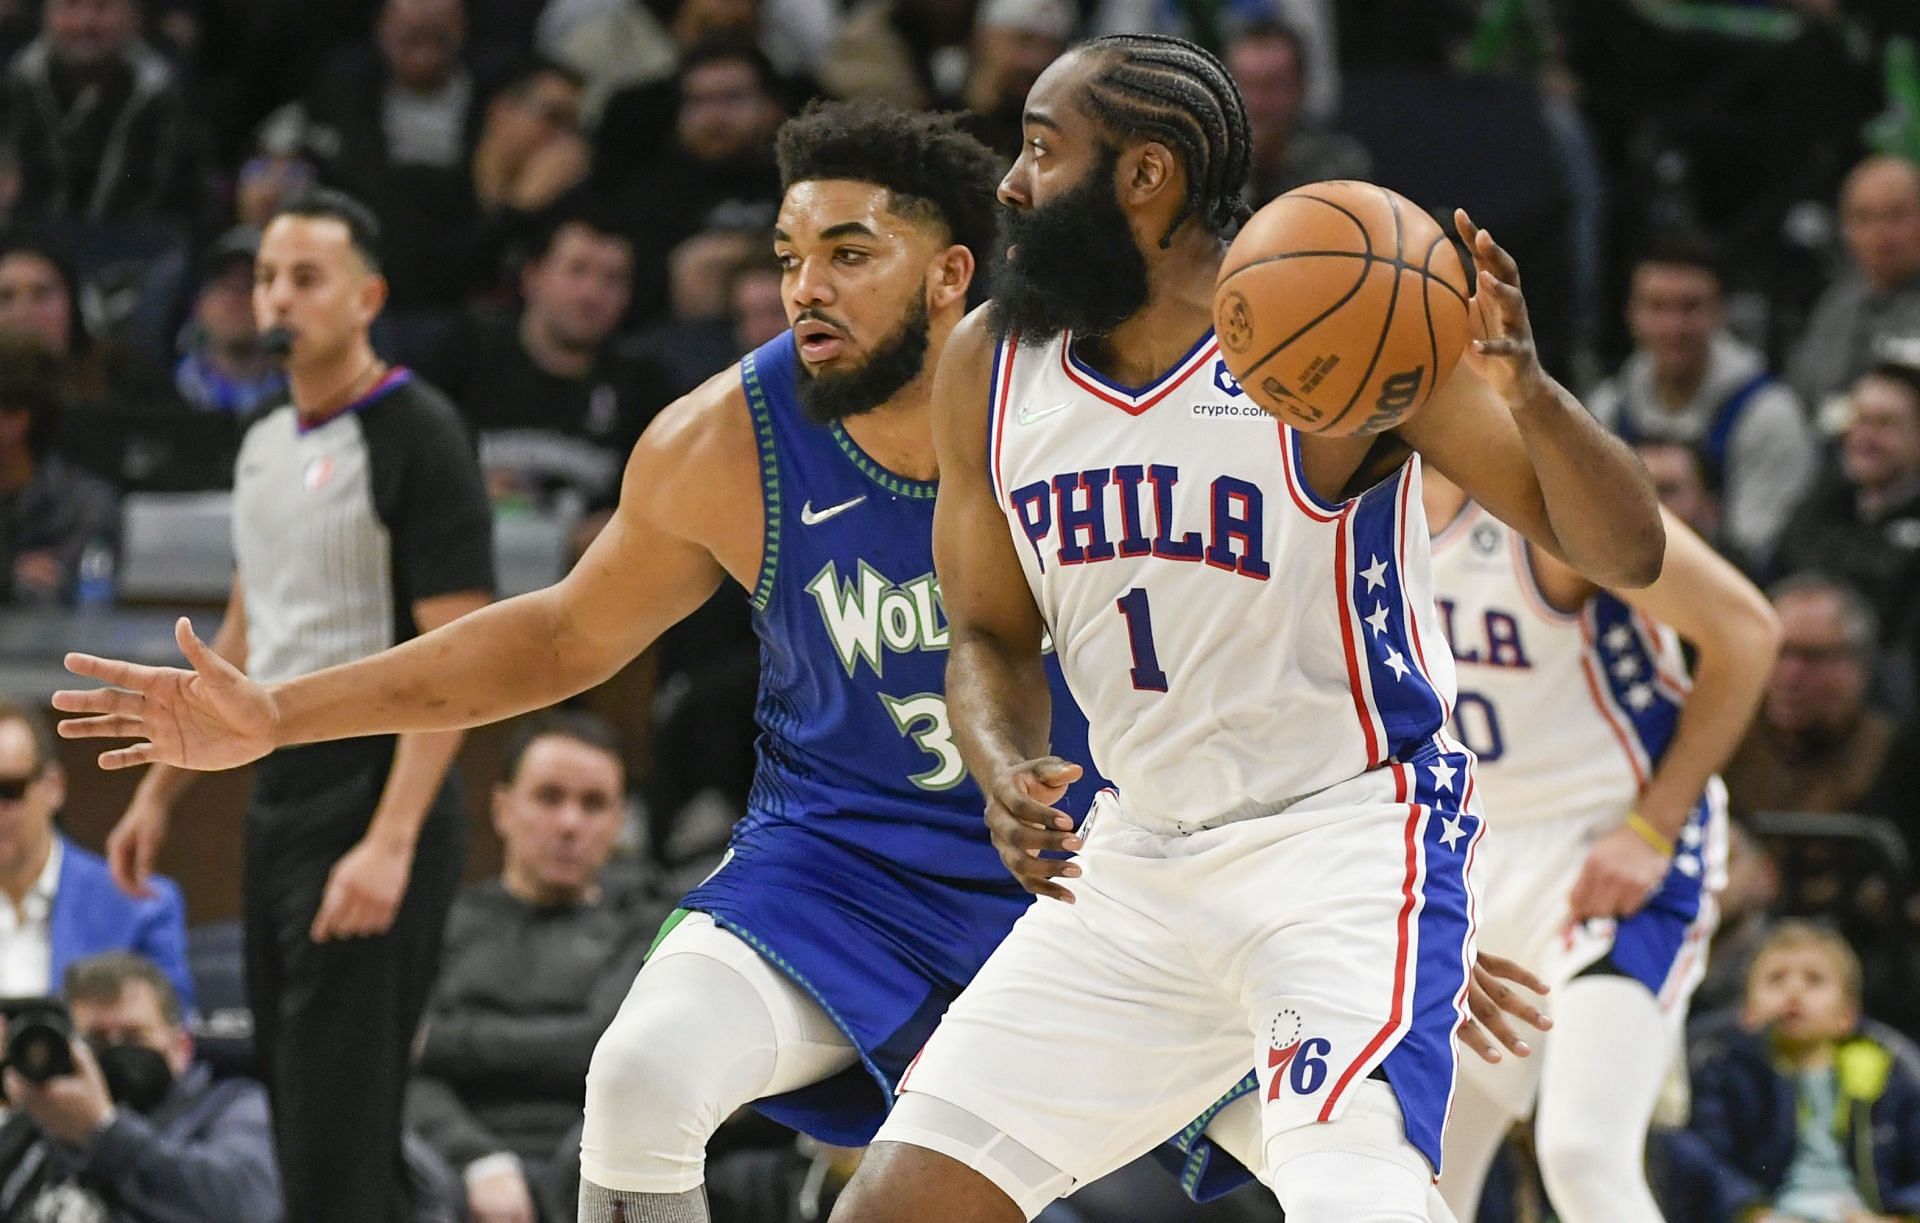 Karl-Anthony Towns (left) of the Minnesota Timberwolves guarding James Harden